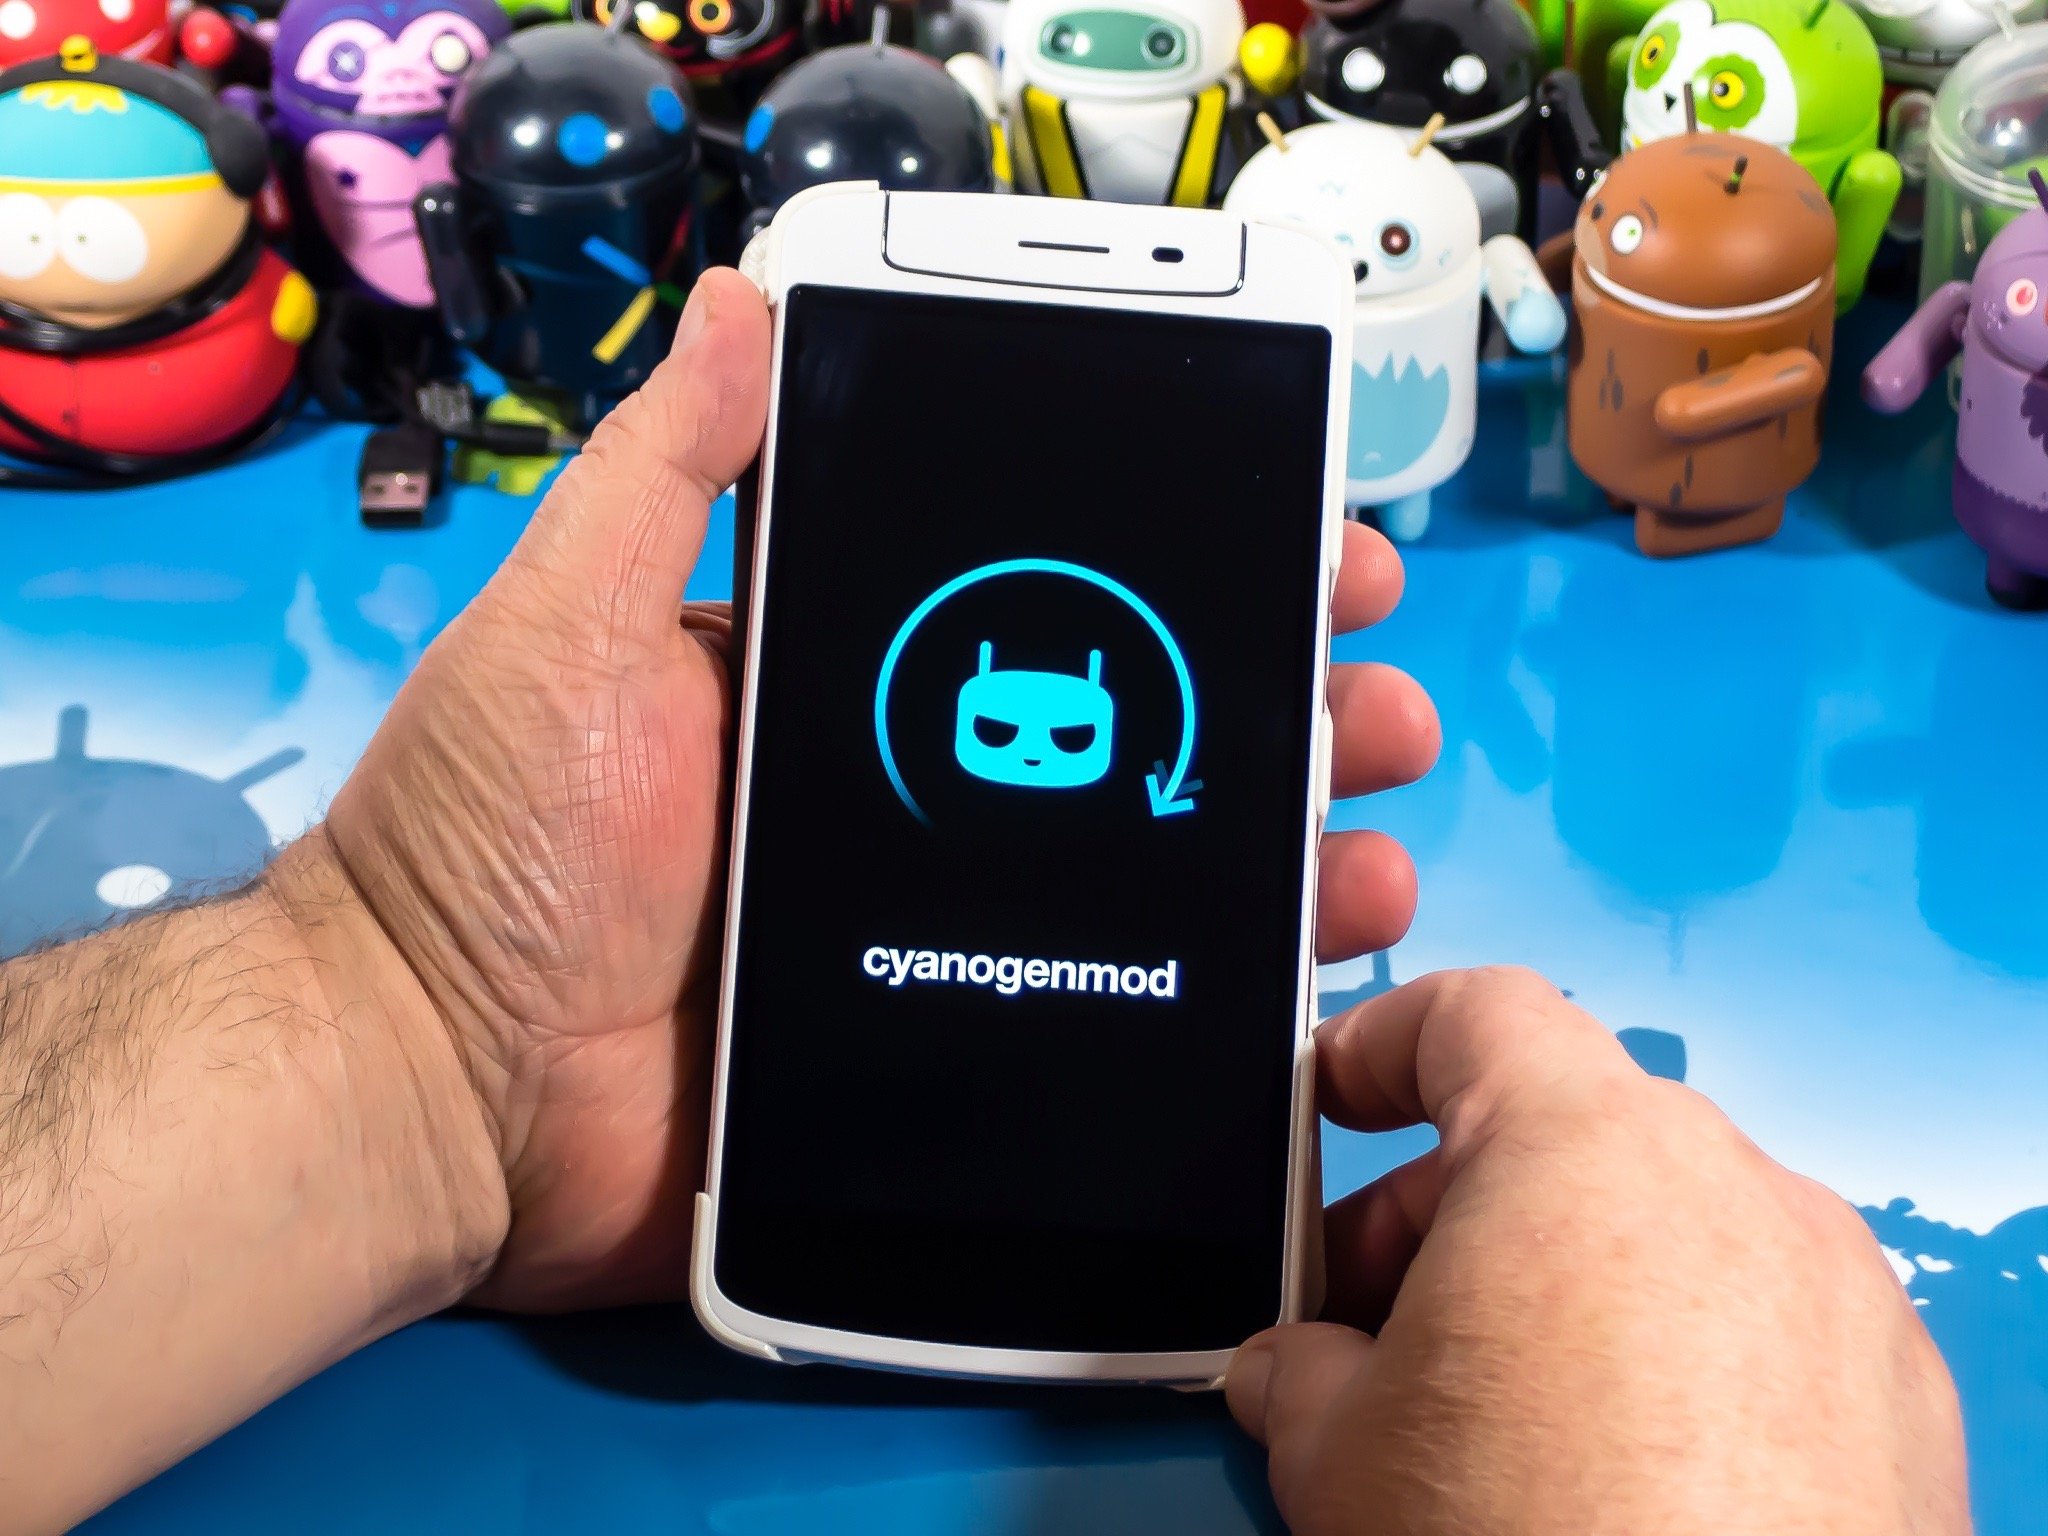 CyanogenMod logo on an Android phone